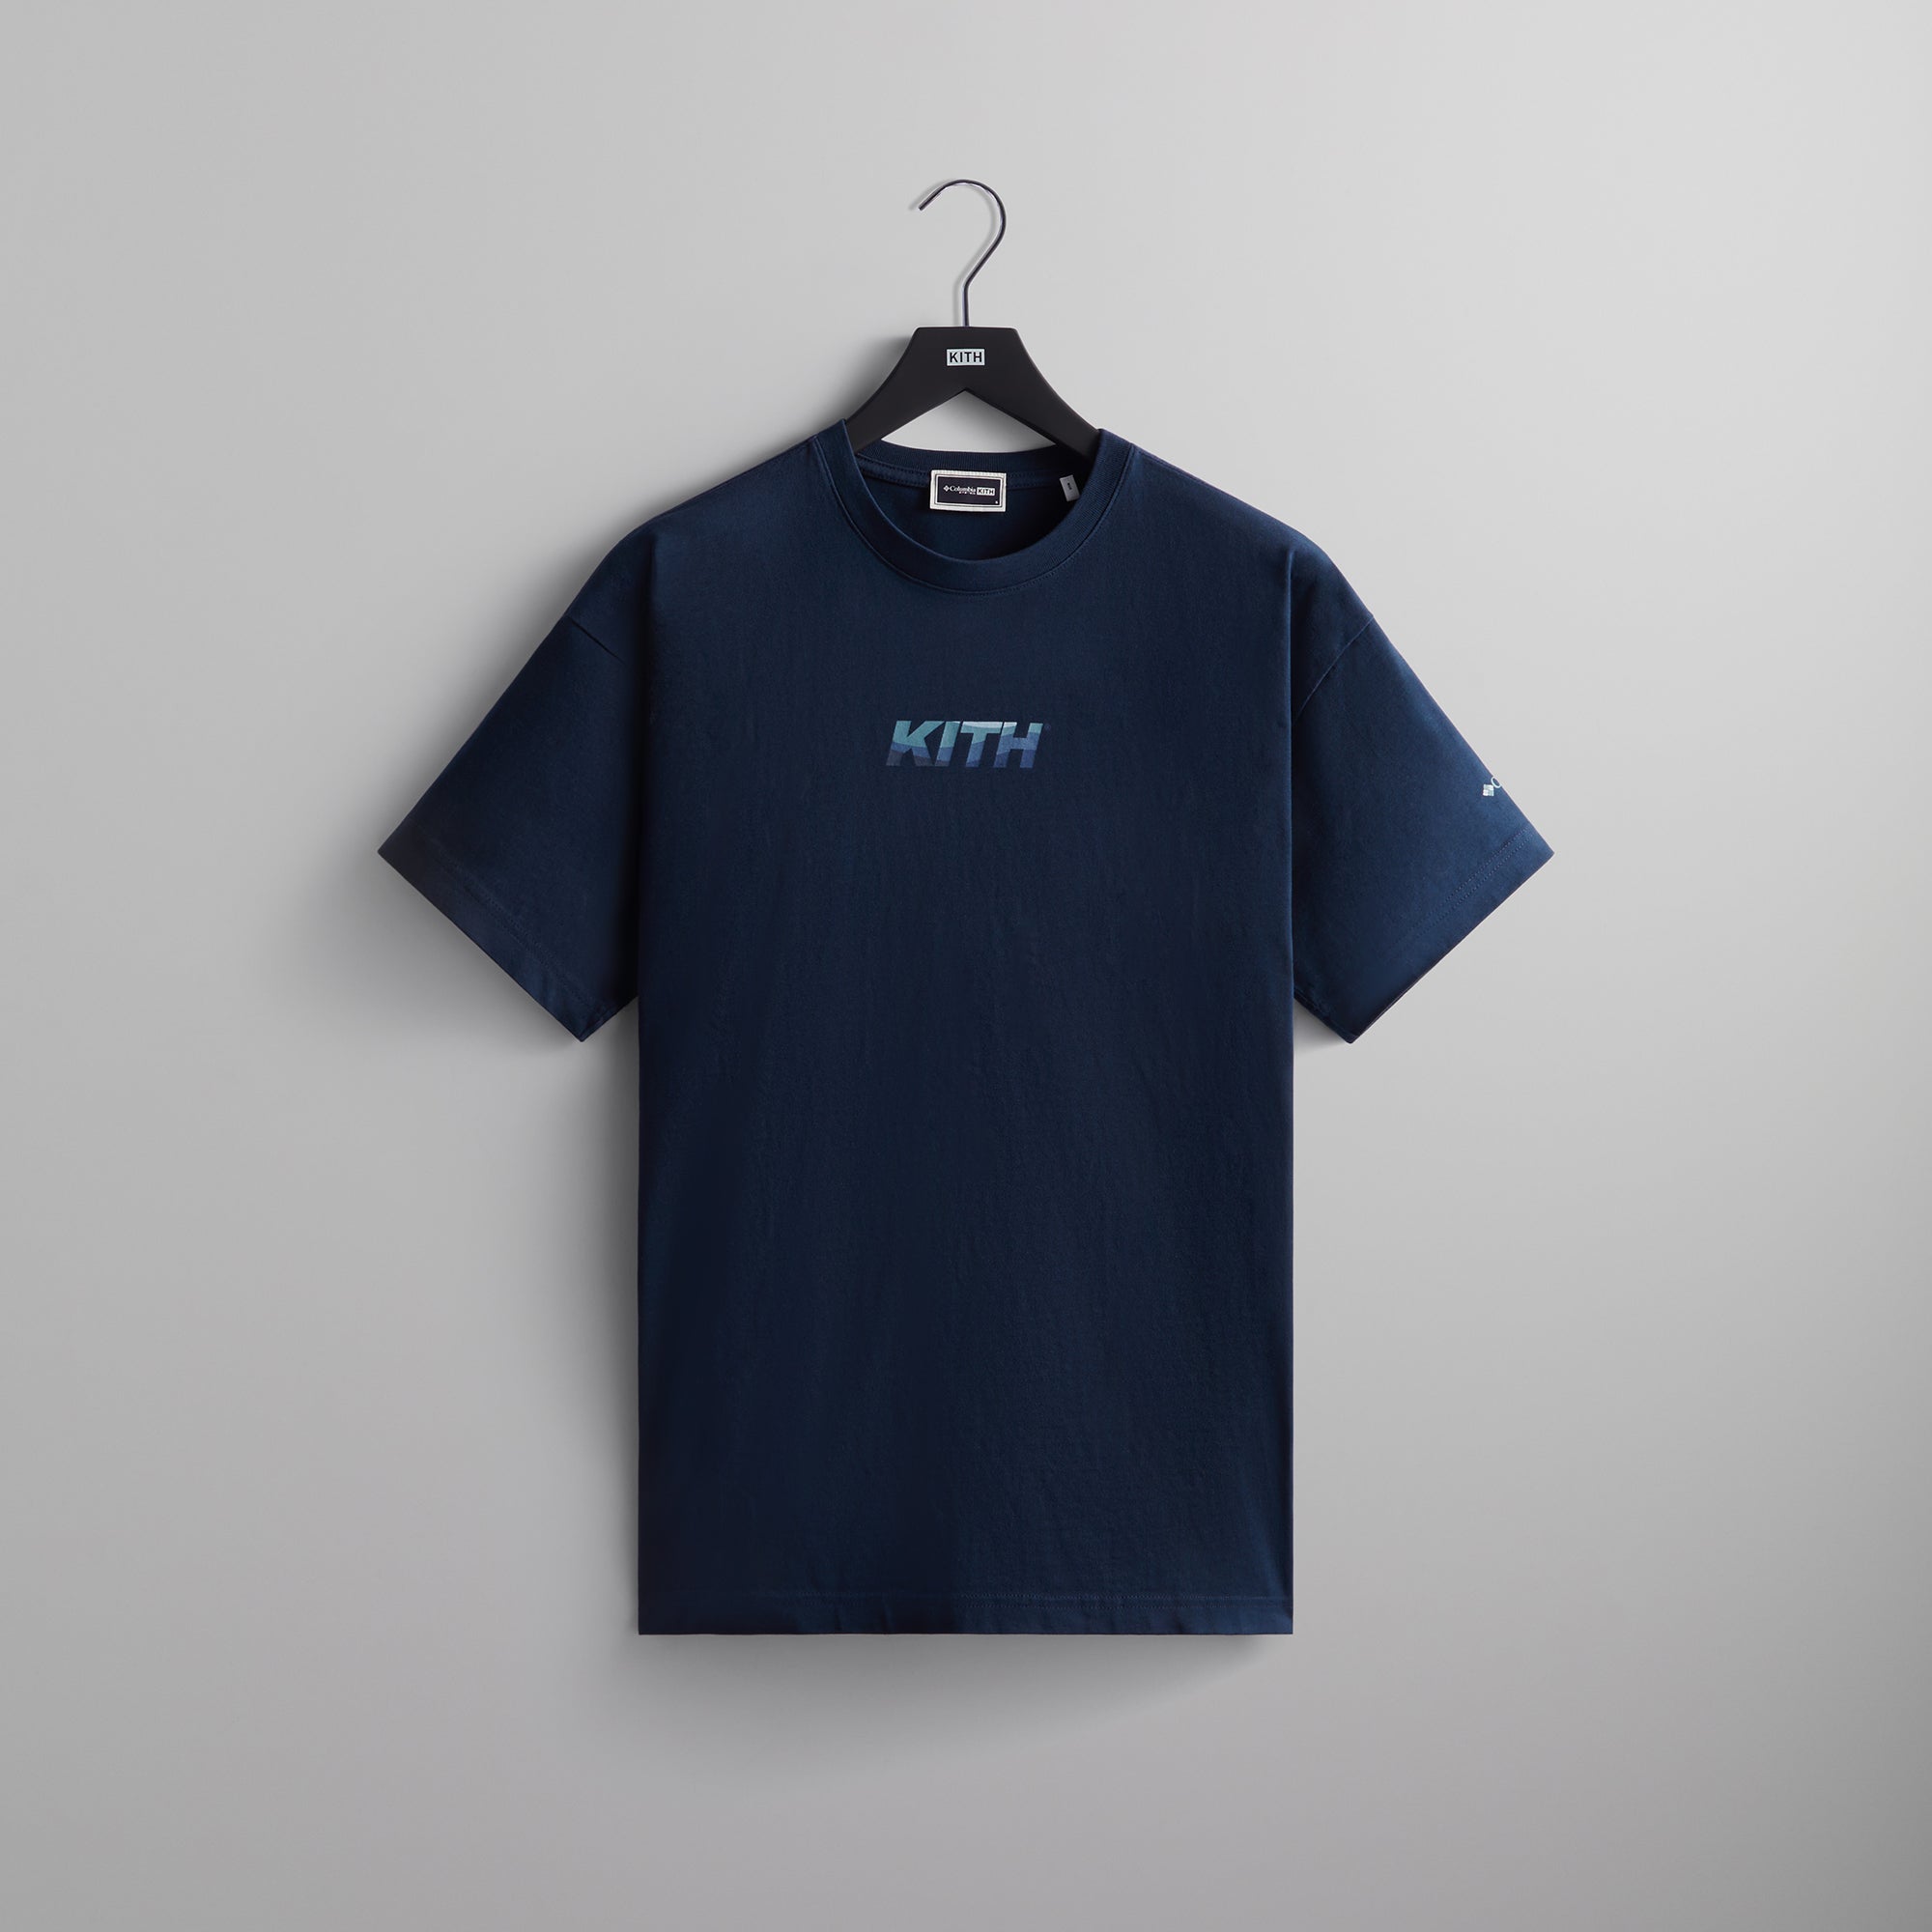 Kith for Columbia PFG Elemental Tee - Nocturnal